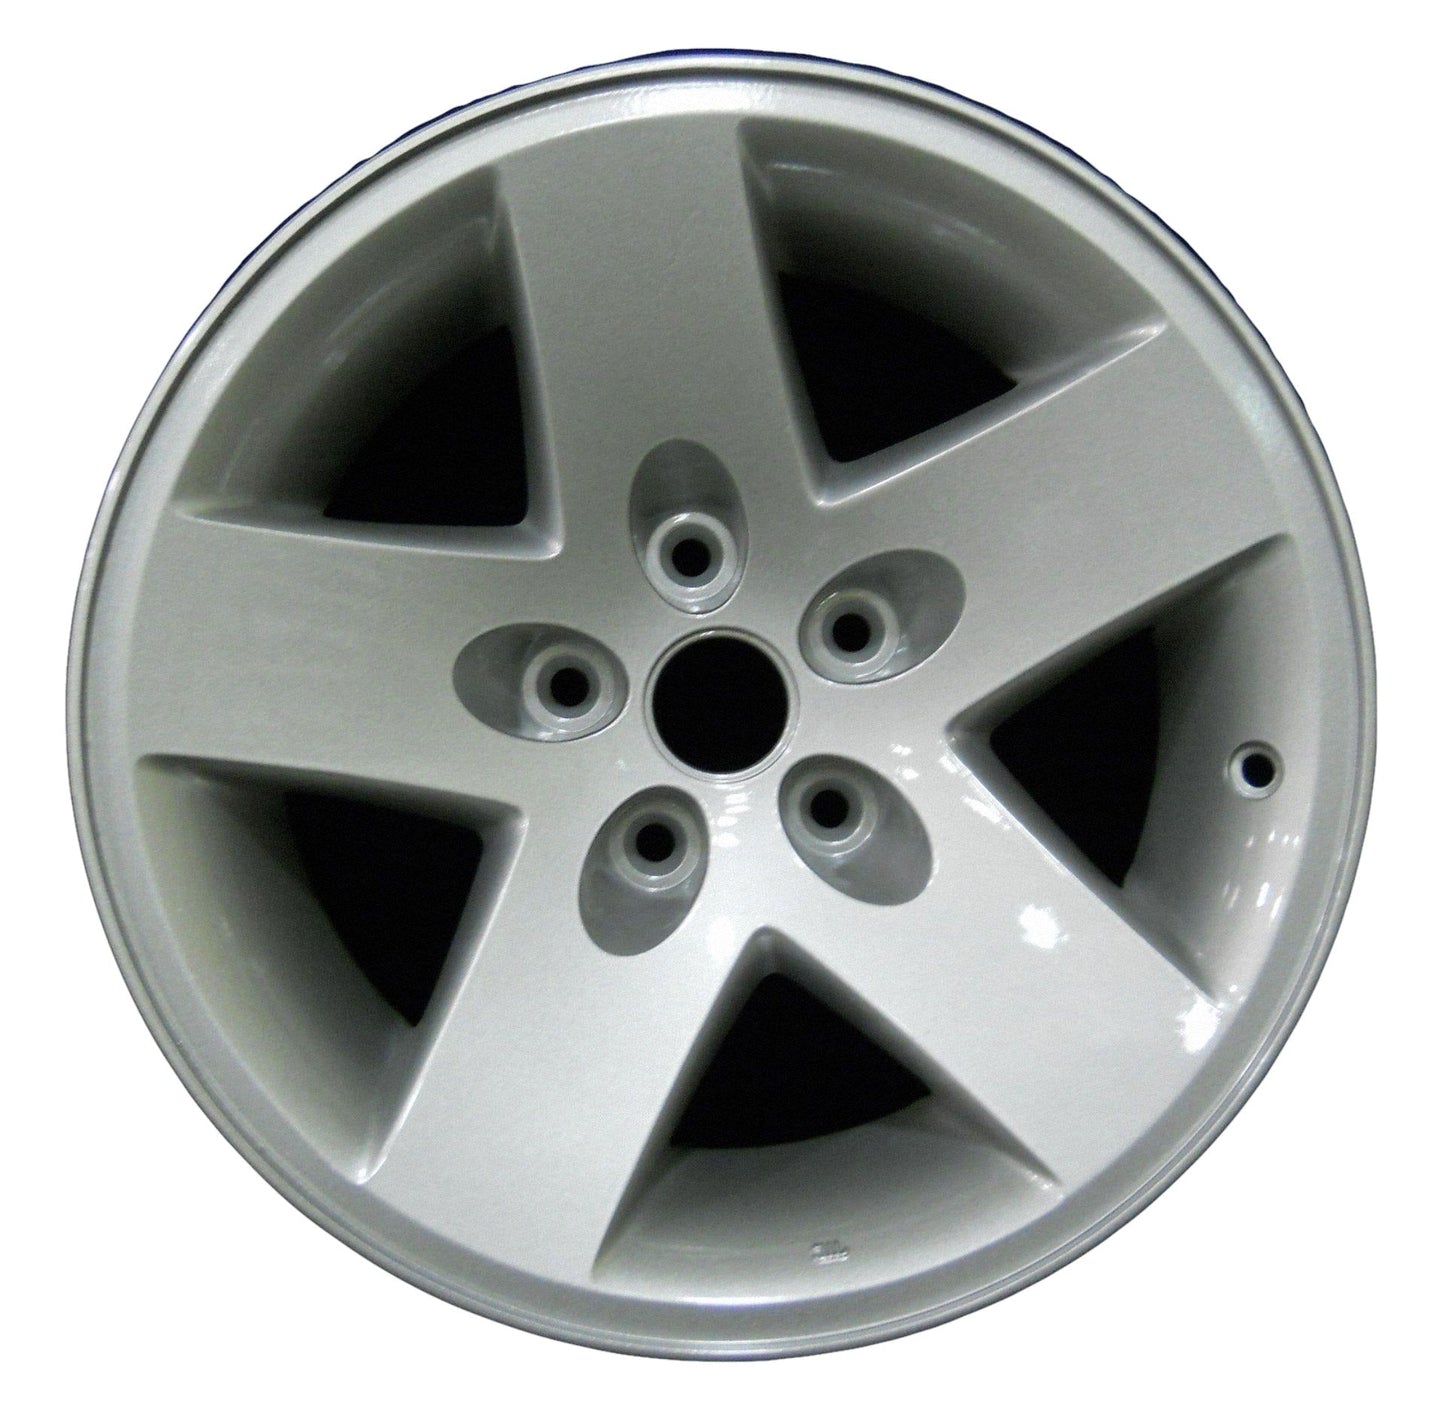 Jeep Wrangler  2002, 2003, 2004, 2005, 2006, 2007, 2008, 2009 Factory OEM Car Wheel Size 16x8 Alloy WAO.9047A.PS02.FF